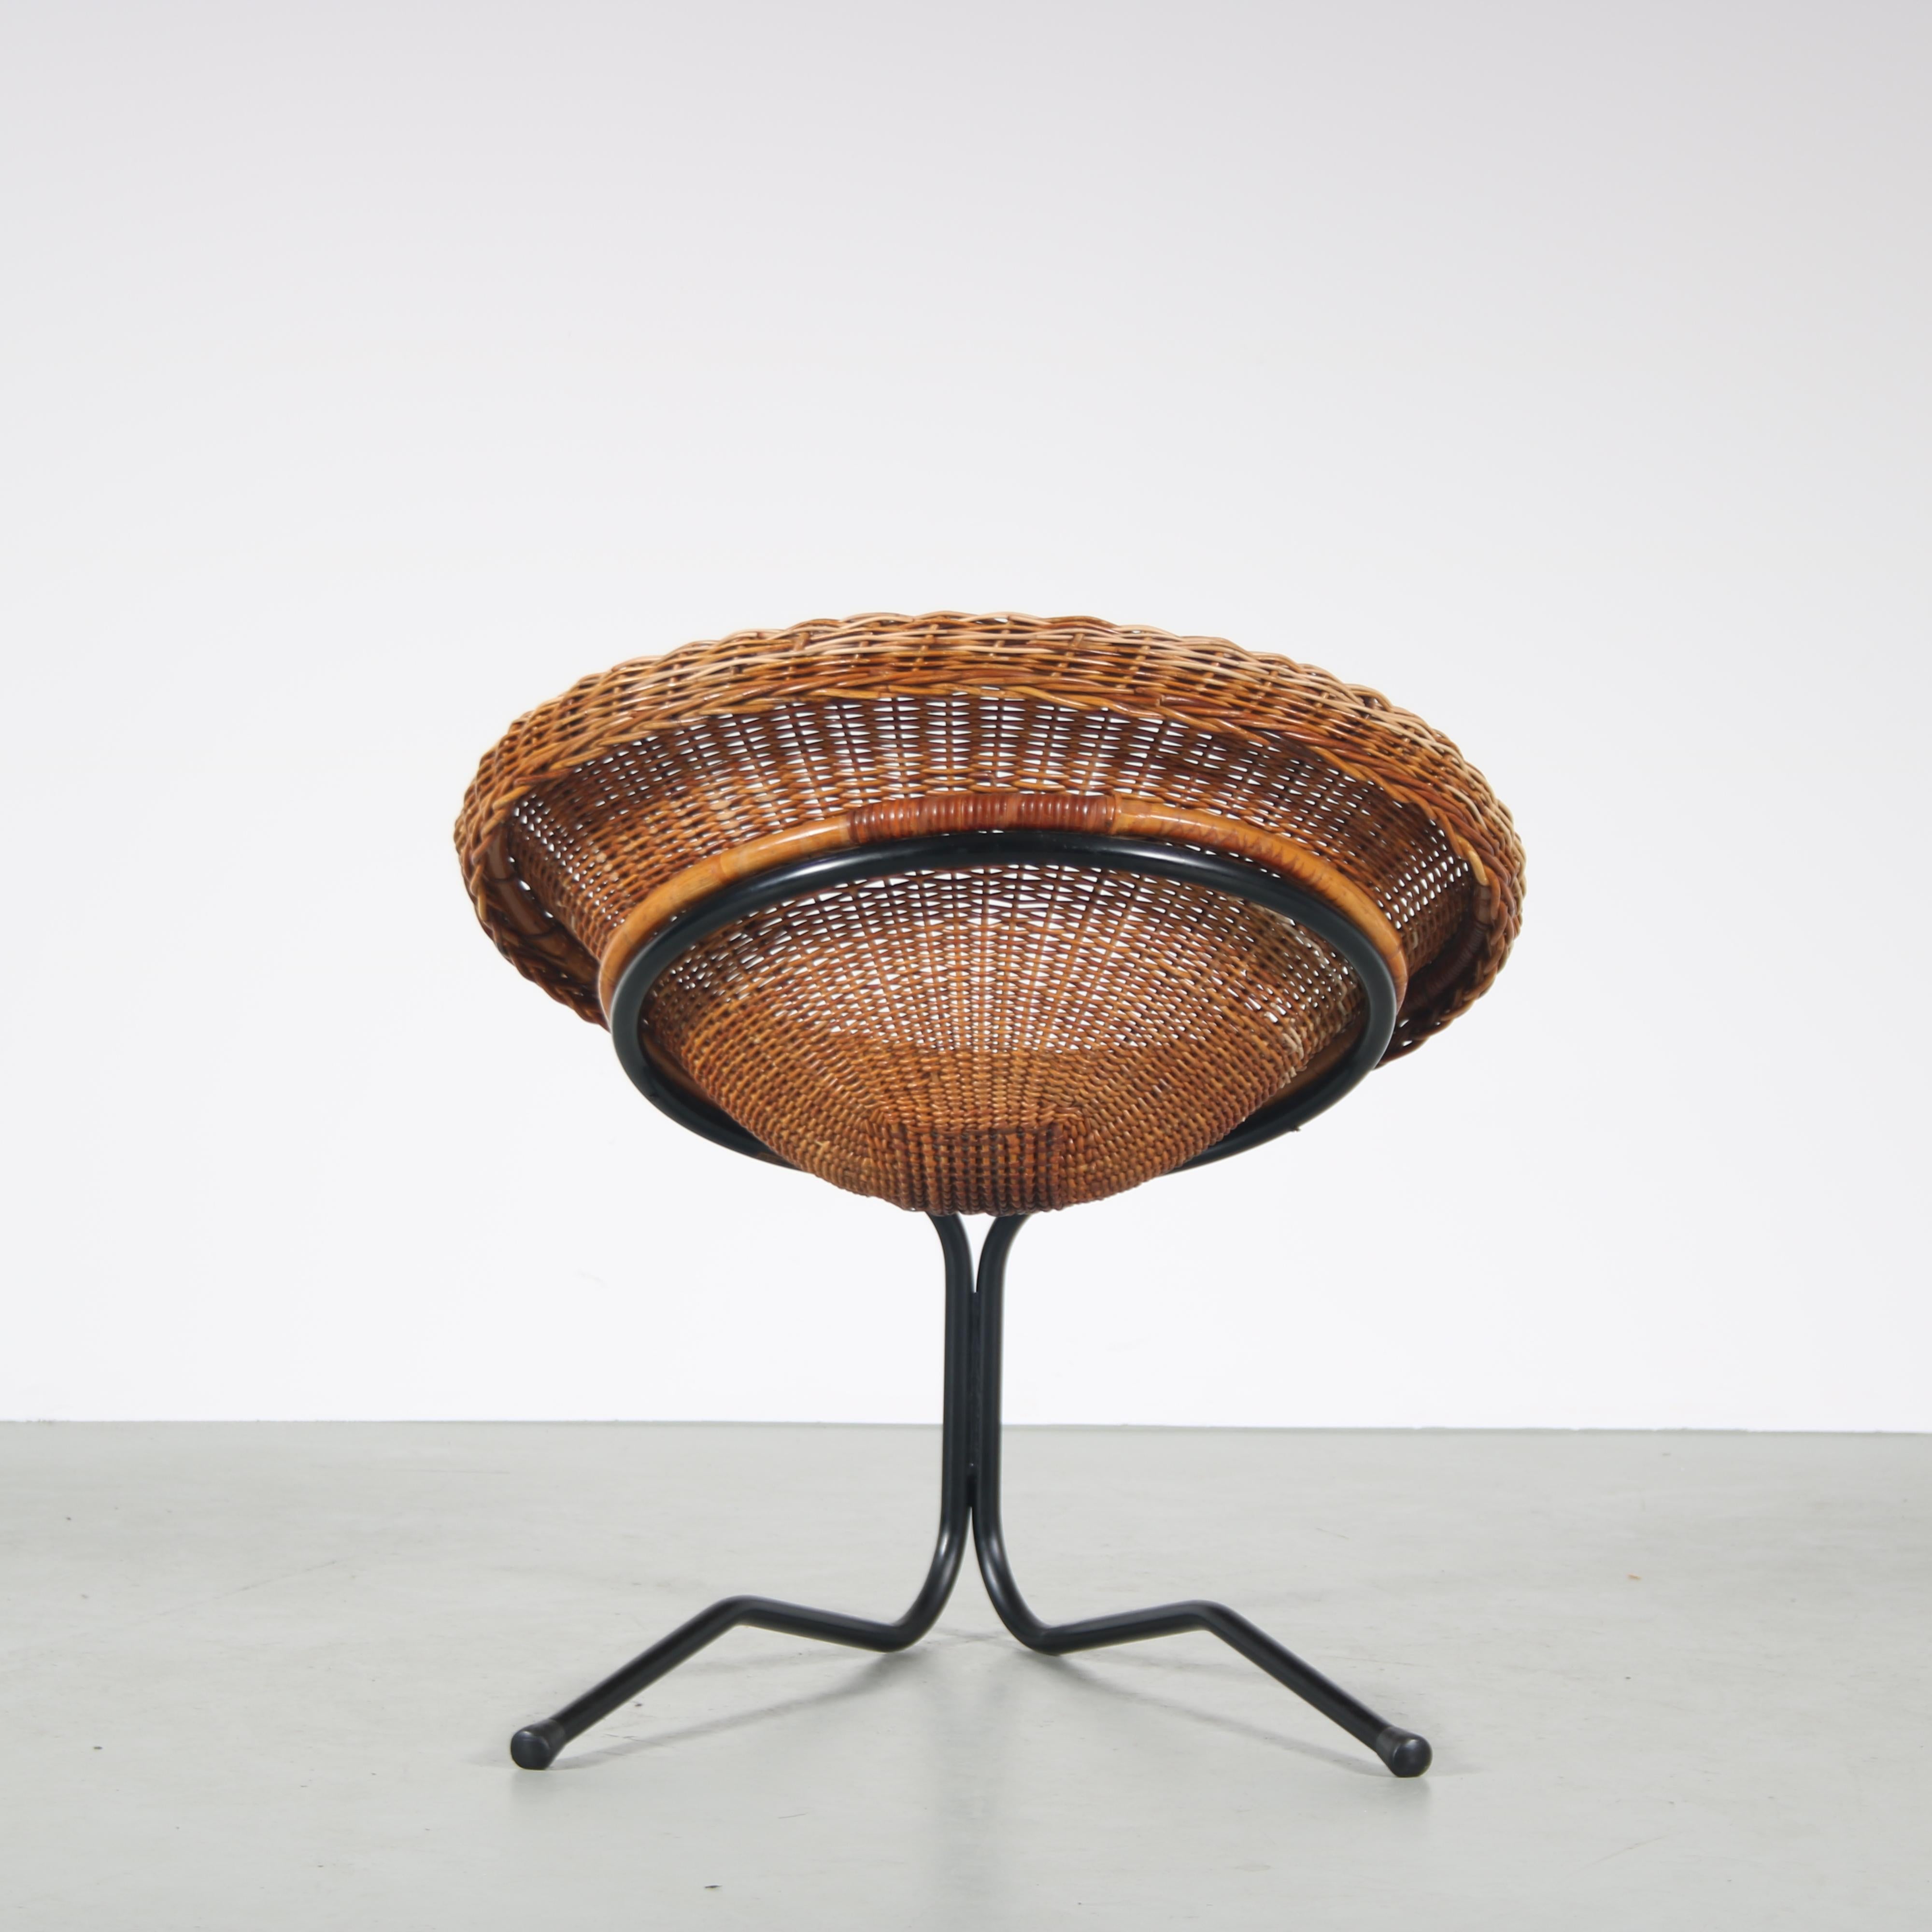 Mid-20th Century 1950s Wicker chair by A. Bueno de Mesquita for Rohé, Netherlands